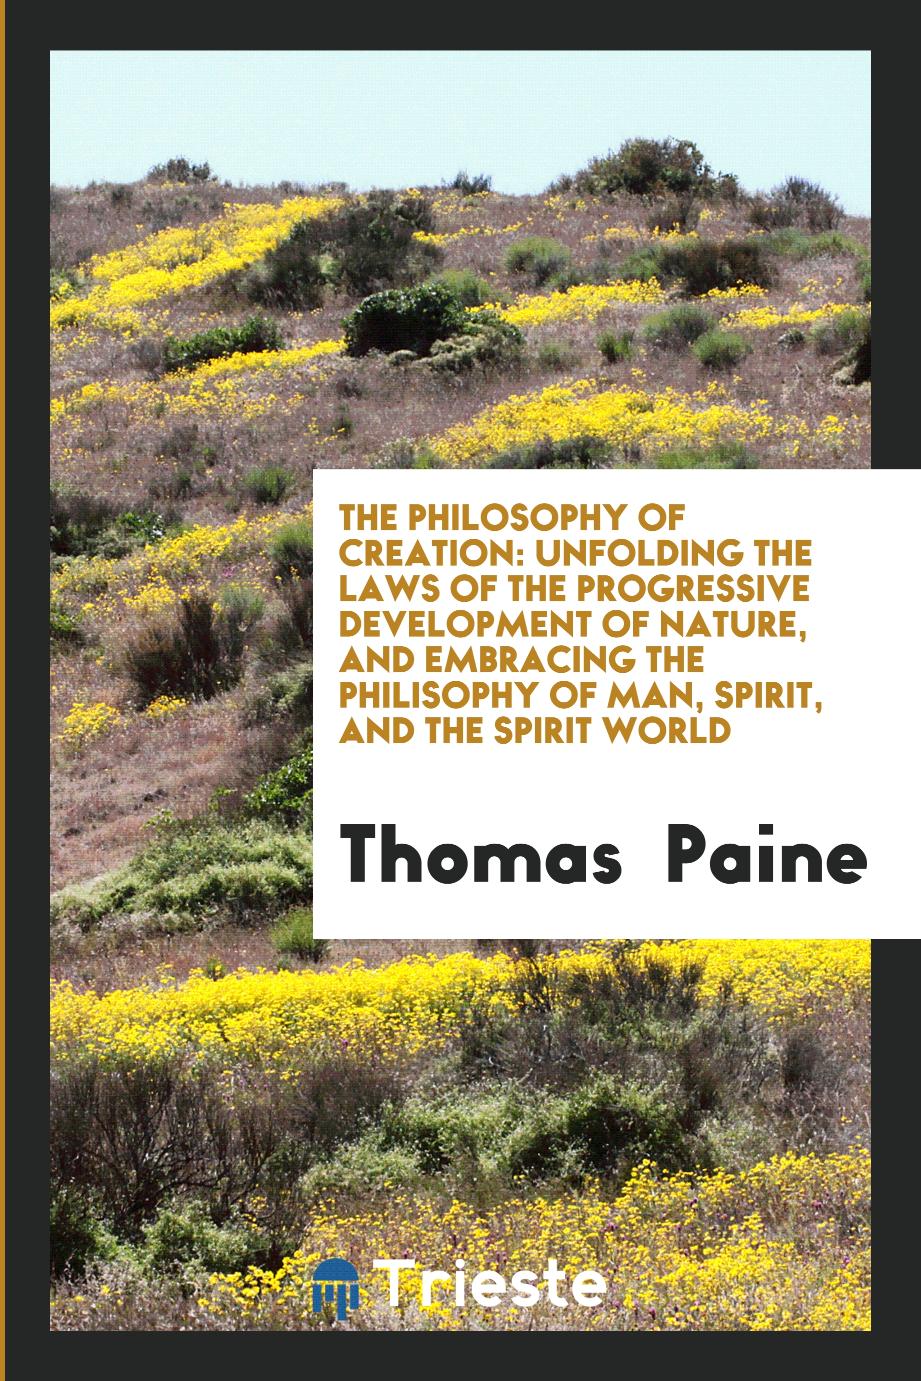 The Philosophy of Creation: Unfolding the Laws of the Progressive Development of Nature, and Embracing the Philisophy of Man, Spirit, and the Spirit World